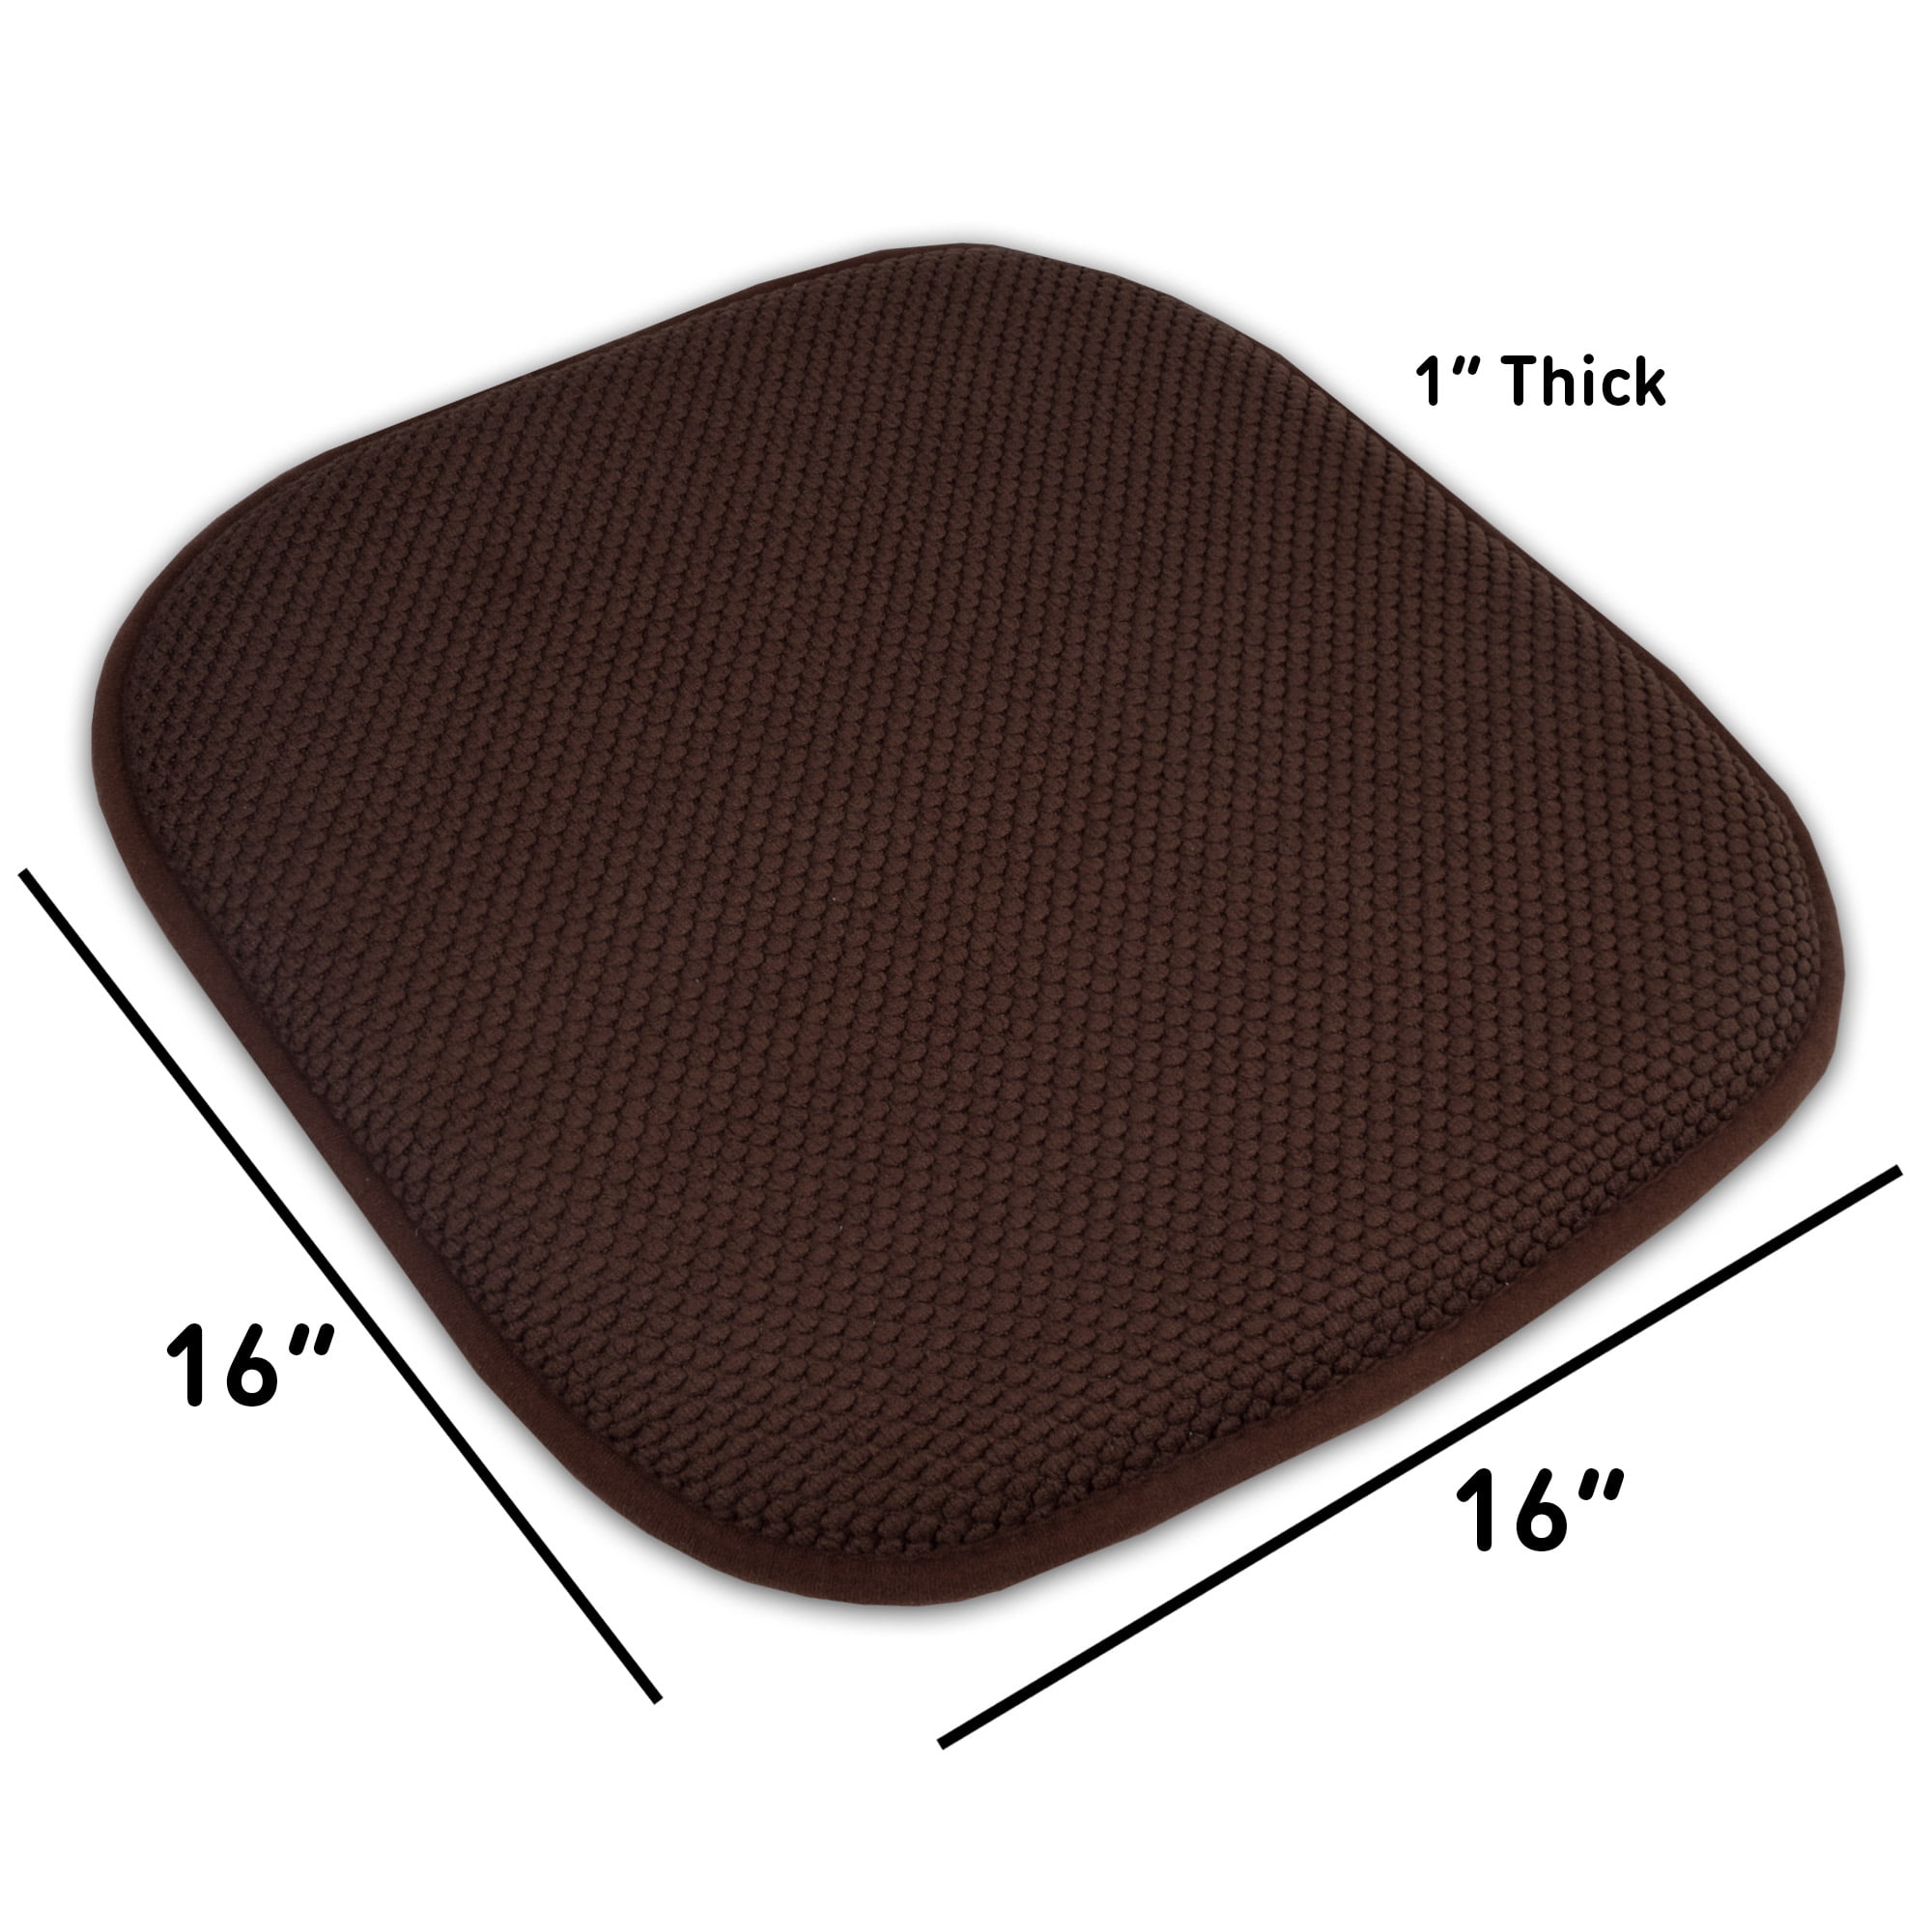 Details about   Memory Foam Honeycomb Non-Slip Chair/Seat 16" x 16" Cushion Pad 2 4 12 Pack 8 